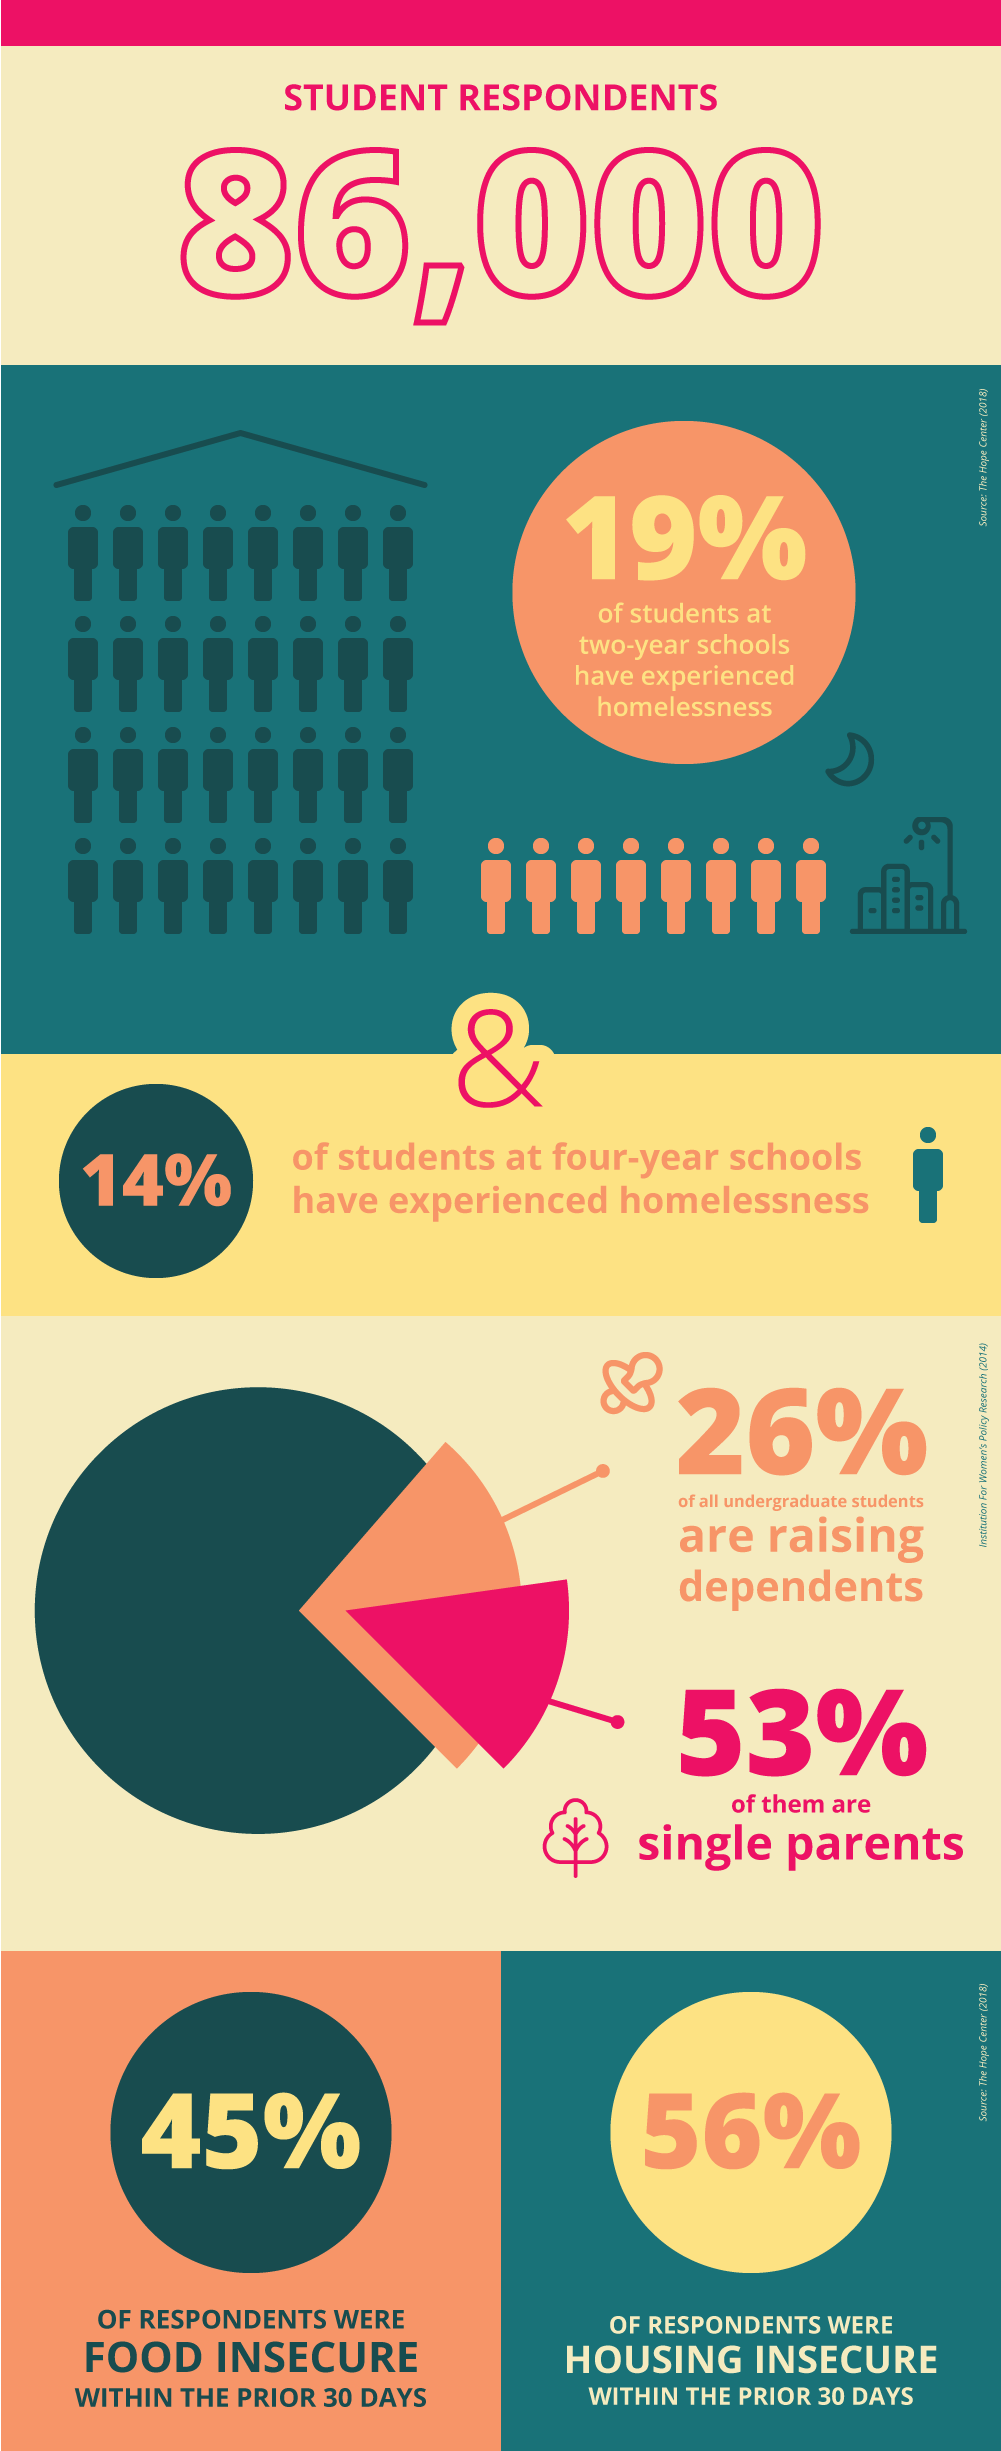 infographic showing the statistics about homelessness and parenthood among college students as described in the previous paragraph